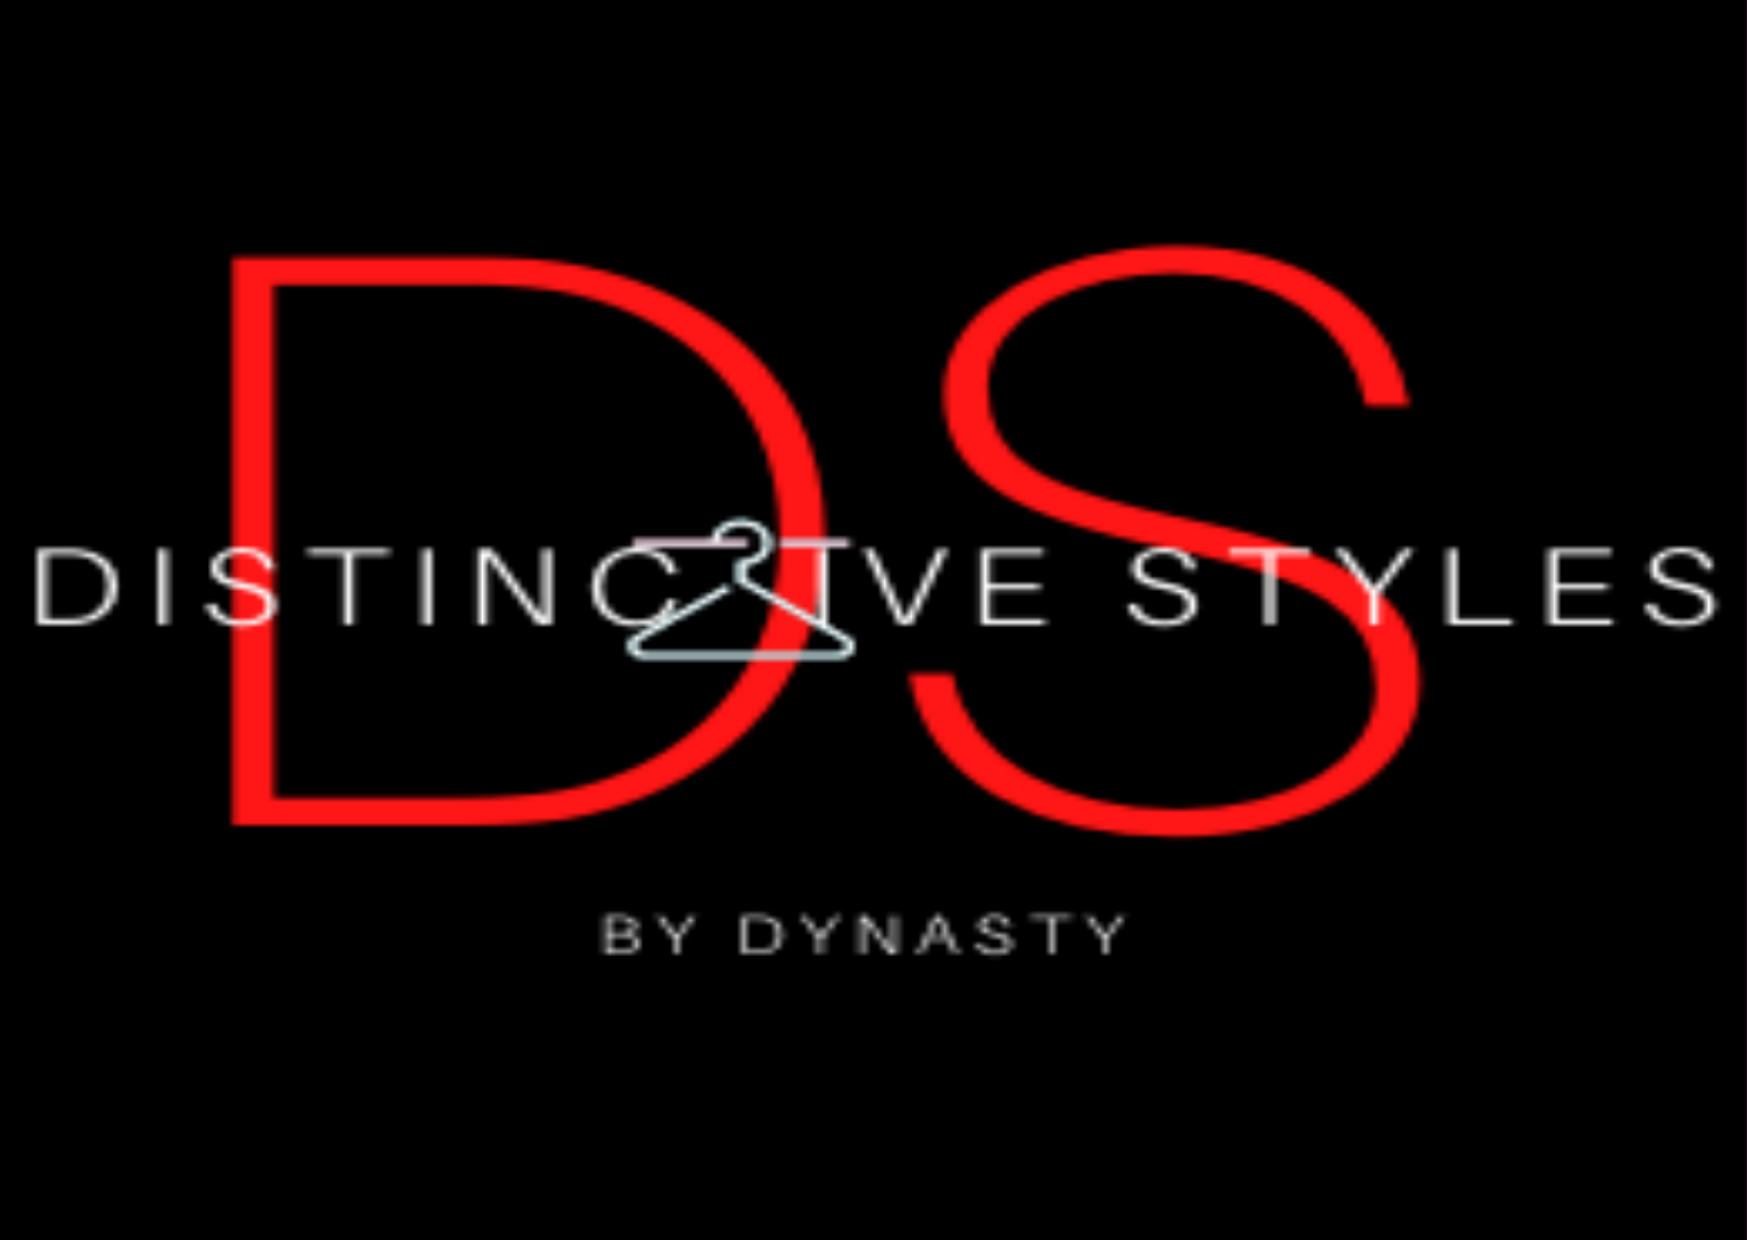 Distinctive Styles Boutique by Dynasty